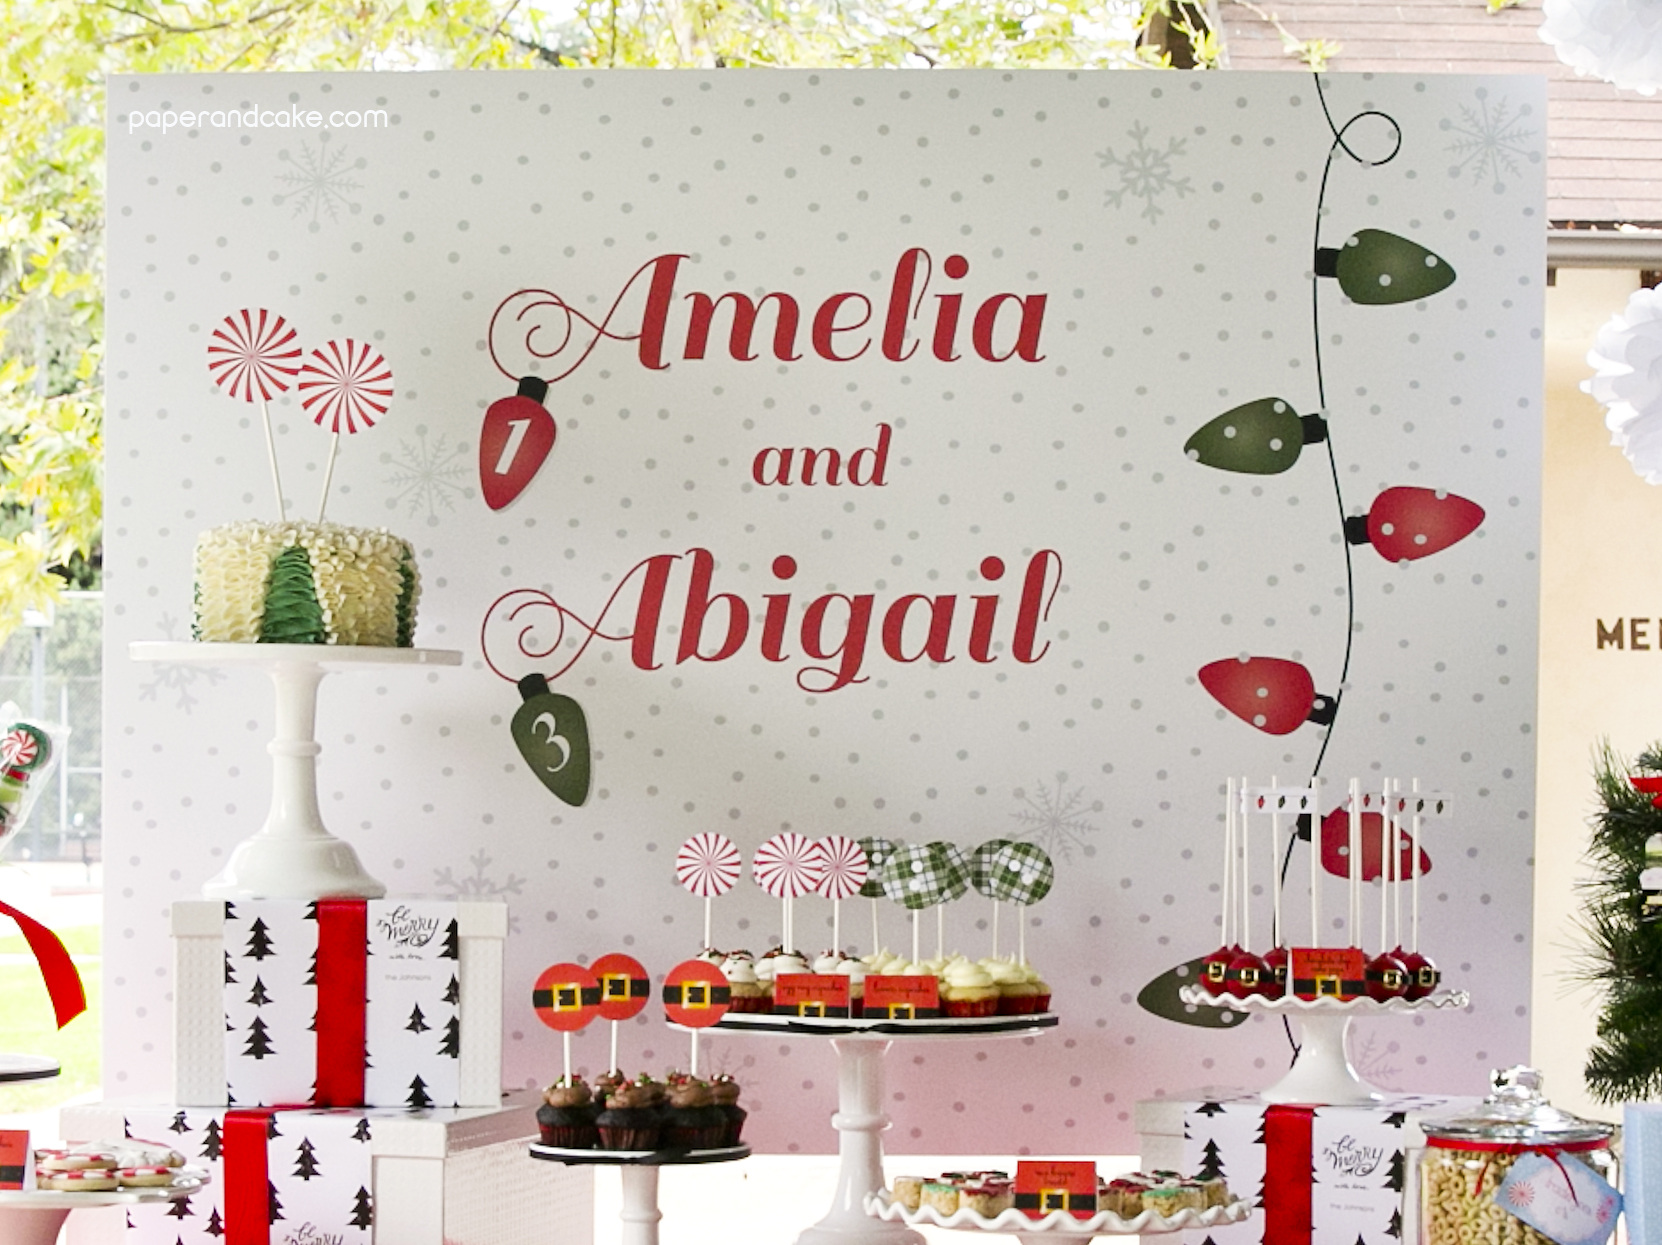 Peppermint and Plaid Party Backdrop Banner